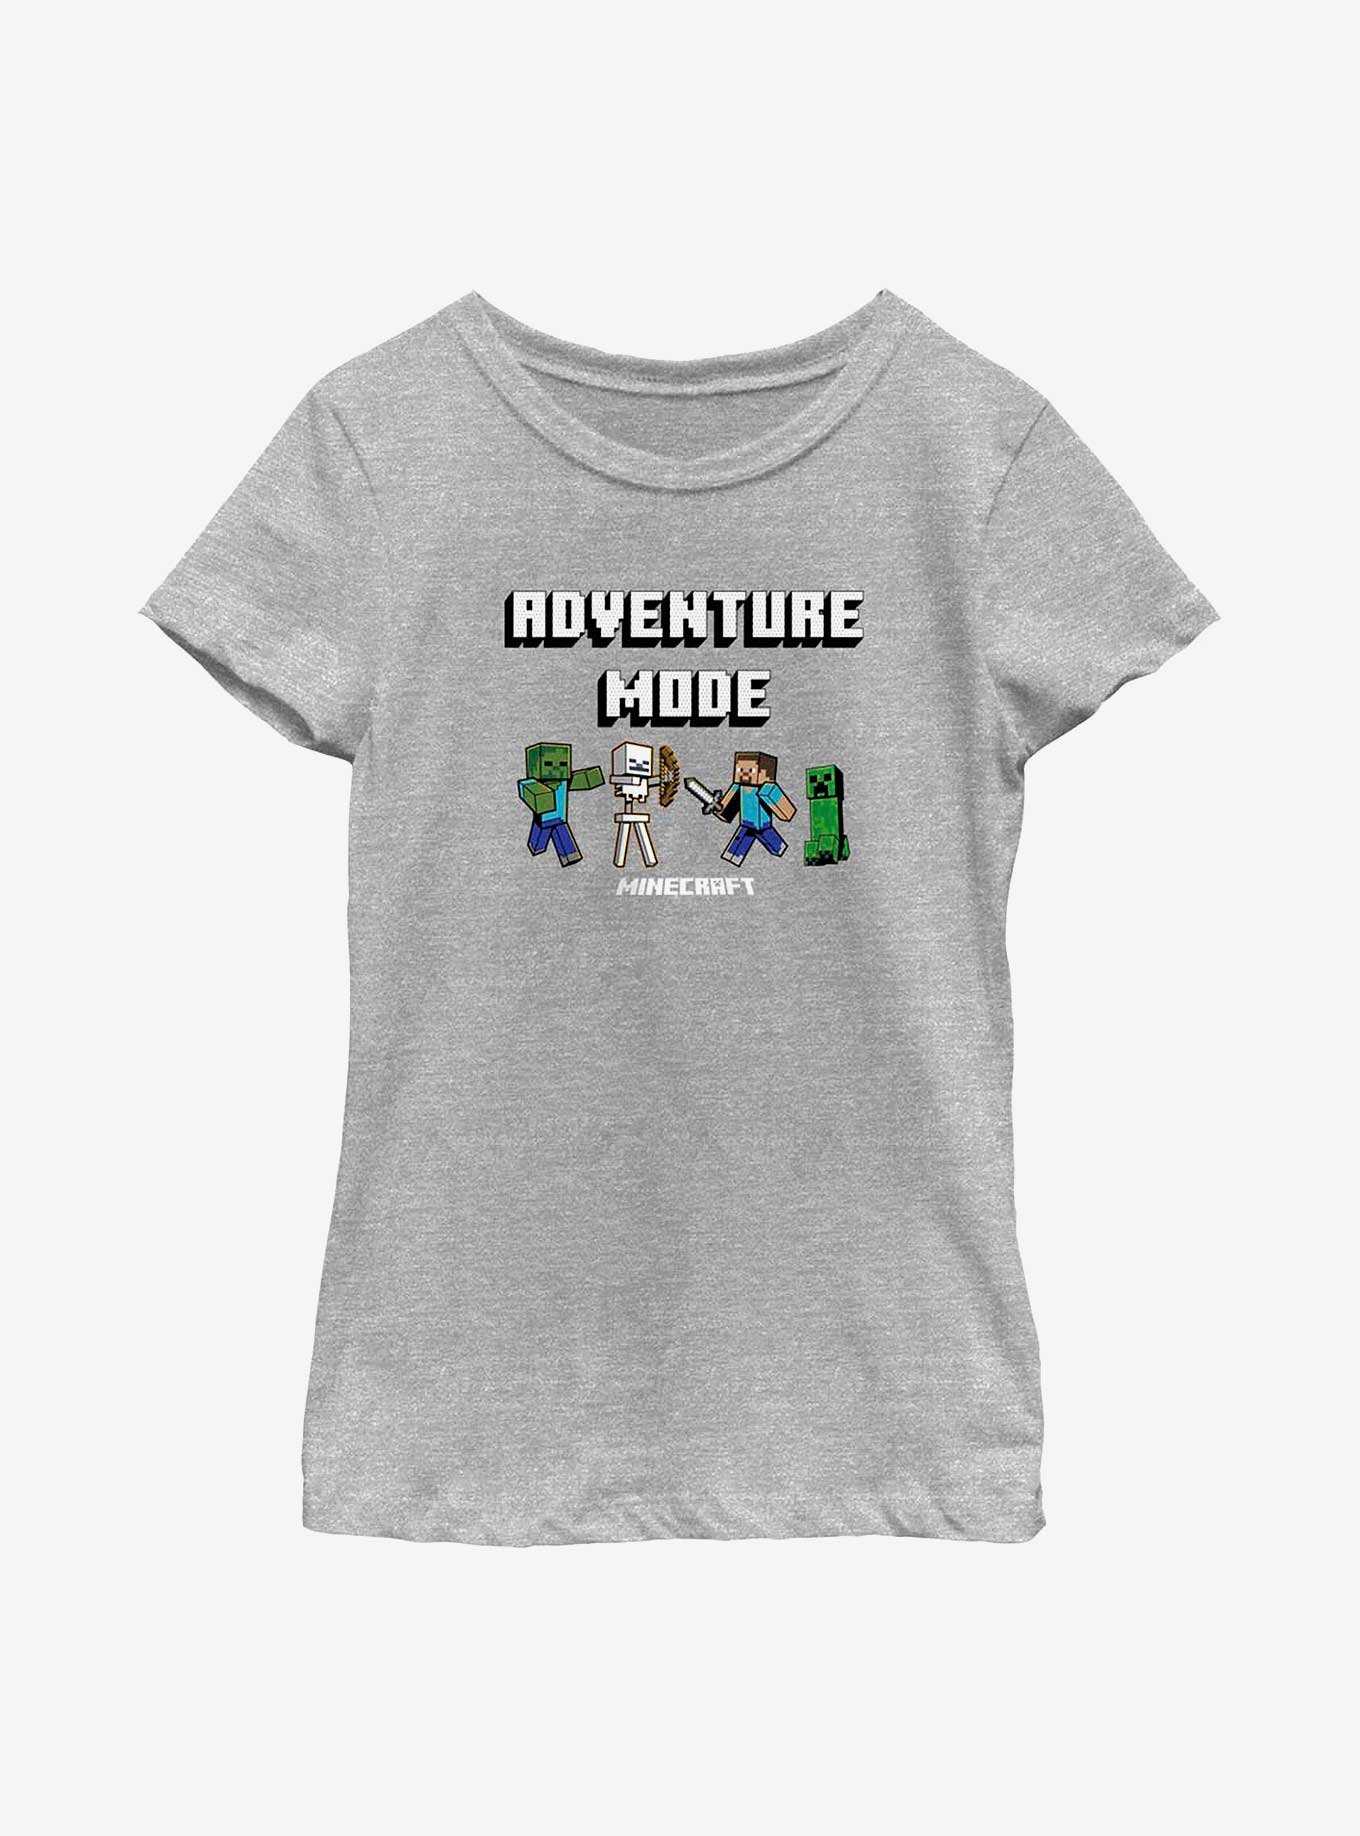 Minecraft All Adventure Mode Youth Girls T-Shirt, , hi-res